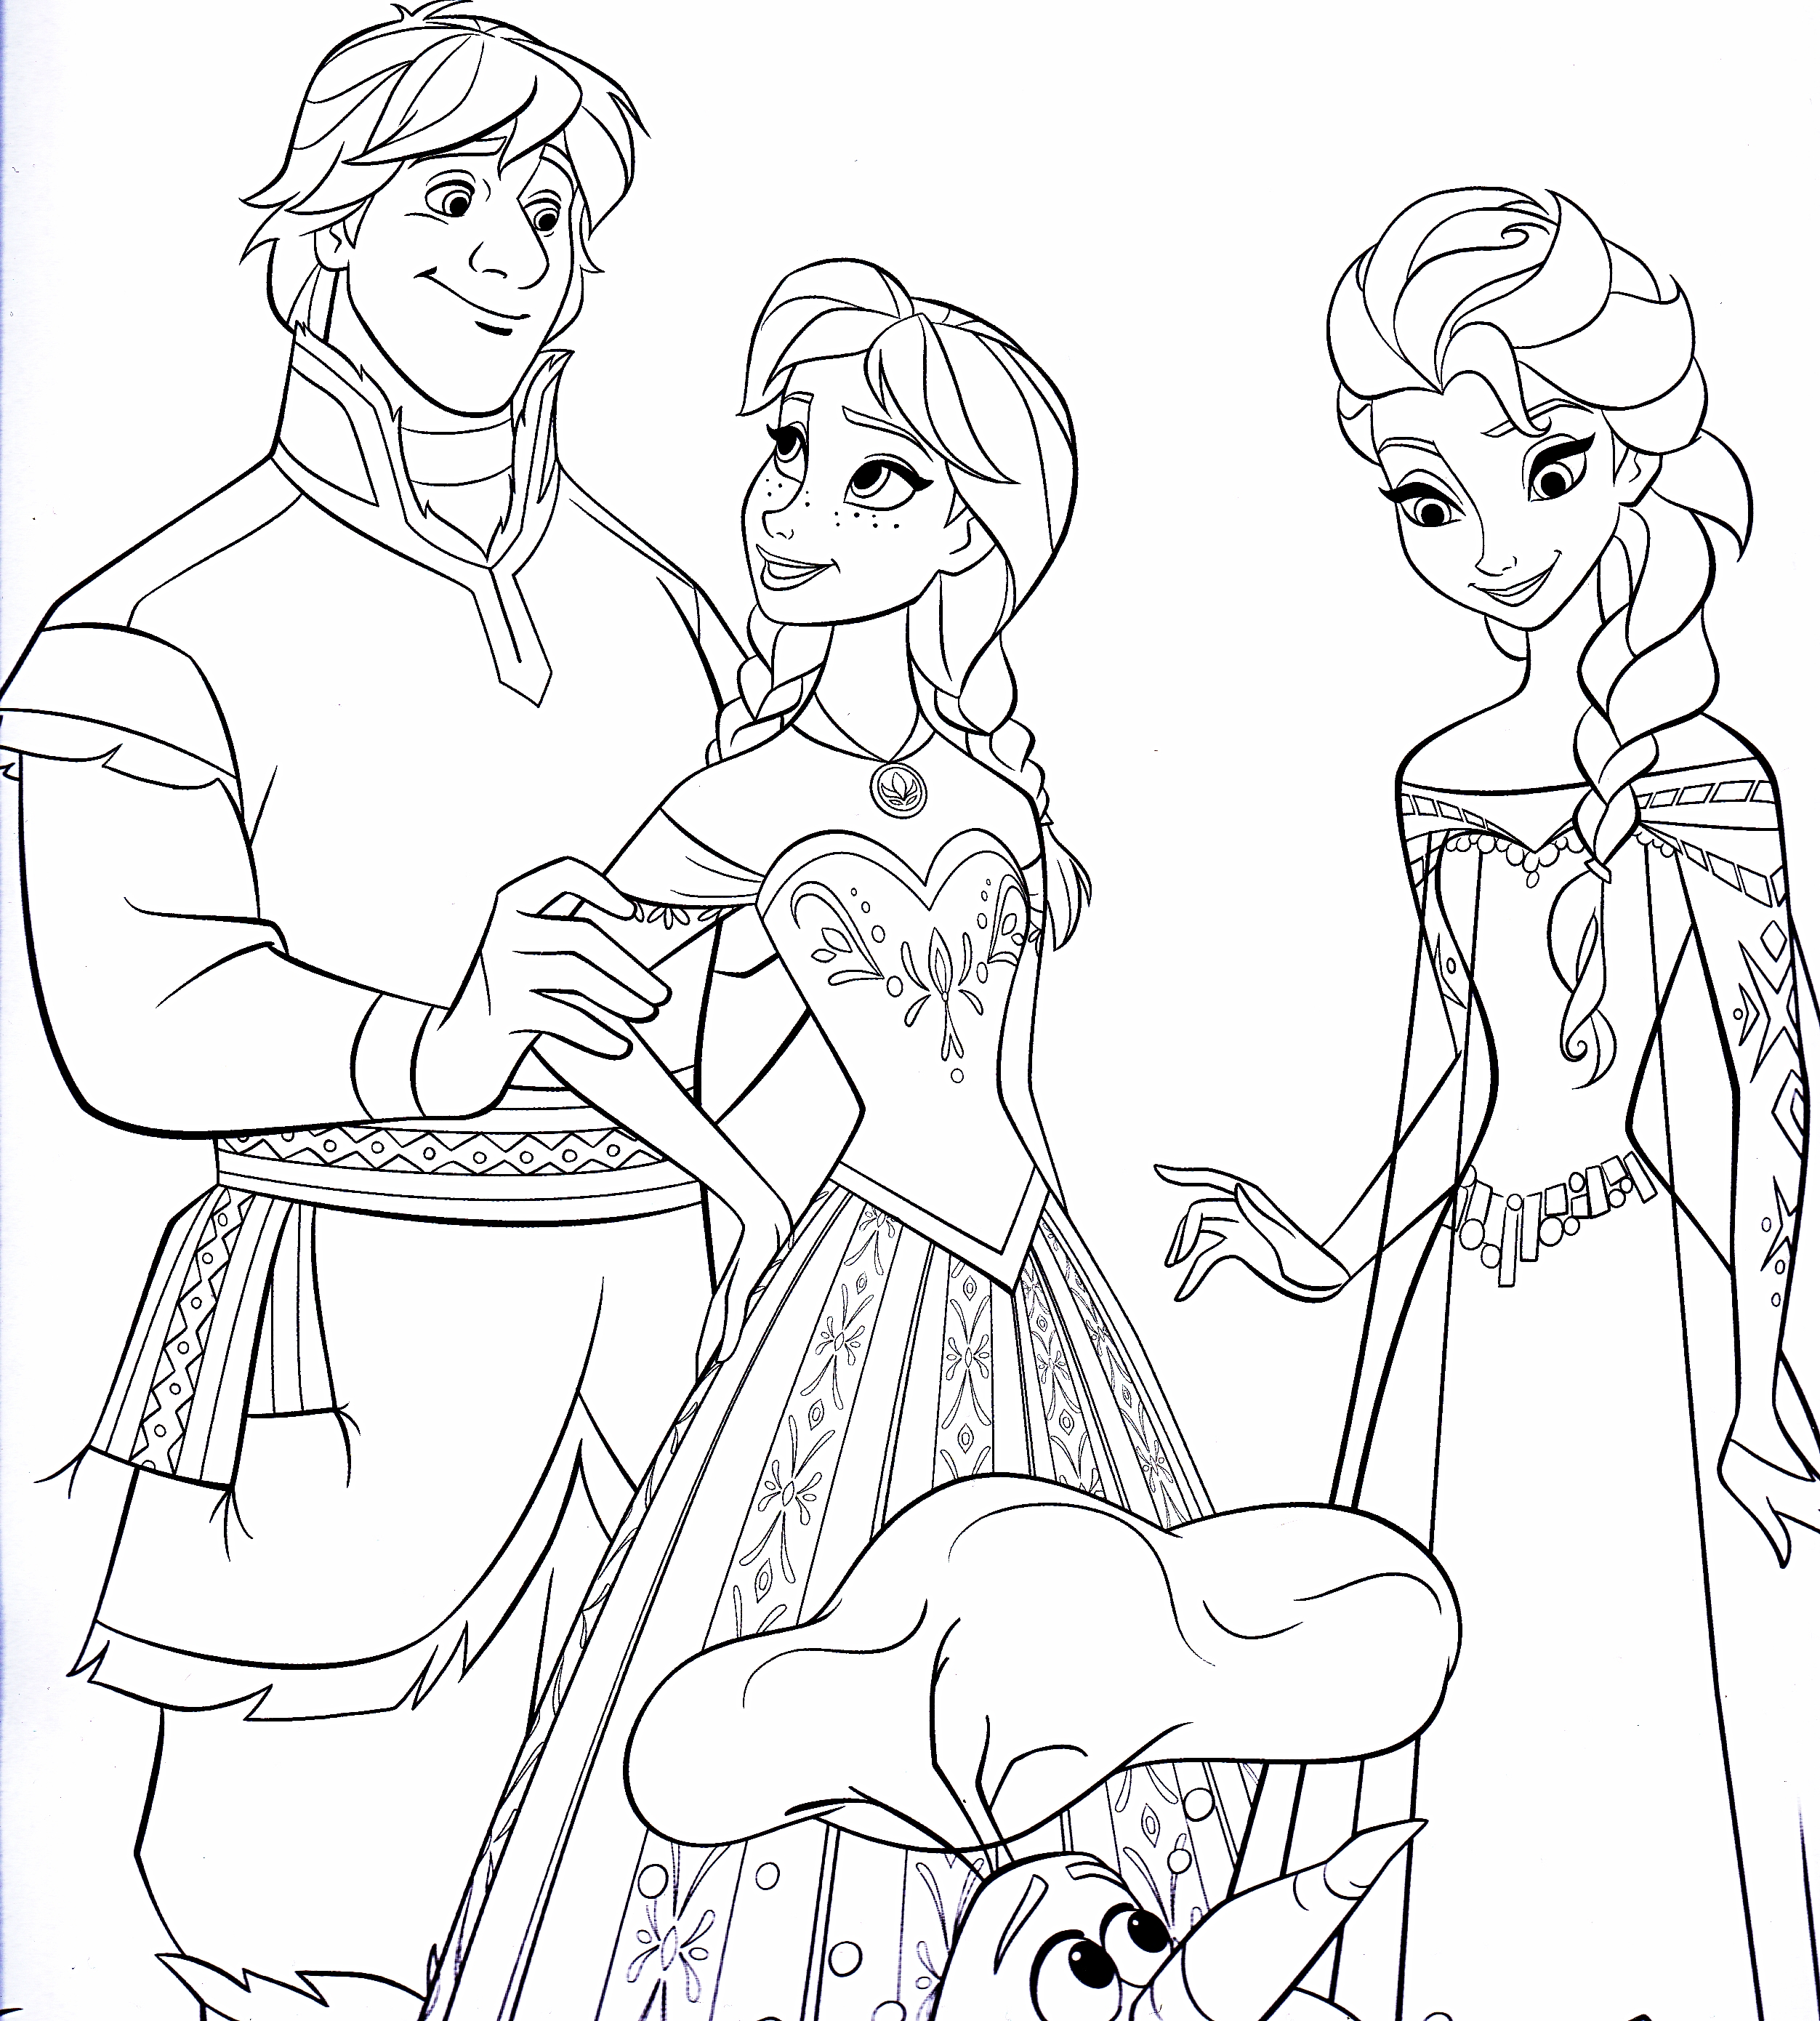 Disneys Frozen Colouring Pages Cute Kawaii Resources